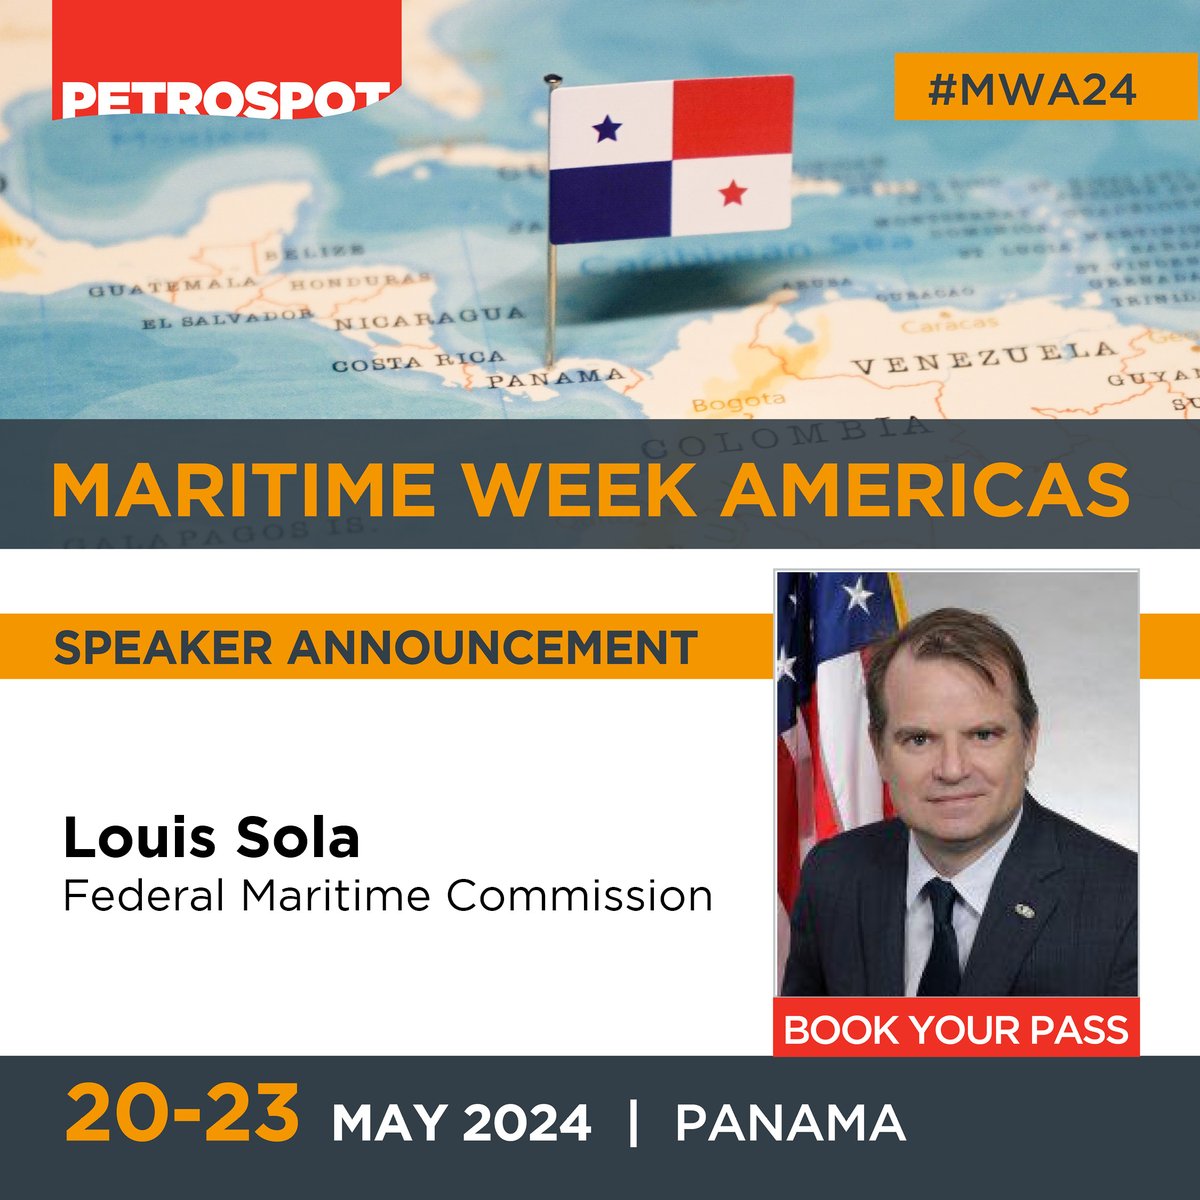 Louis Sola, Commissioner of the Federal Maritime Commission will be speaking at Maritime Week Americas taking place in Panama 20-23 May 2024. View the programme here ➔ lnkd.in/e4pENuCp Register to attend here ➔ lnkd.in/eZDcj2UB #MWA24 #Panama #Shipping